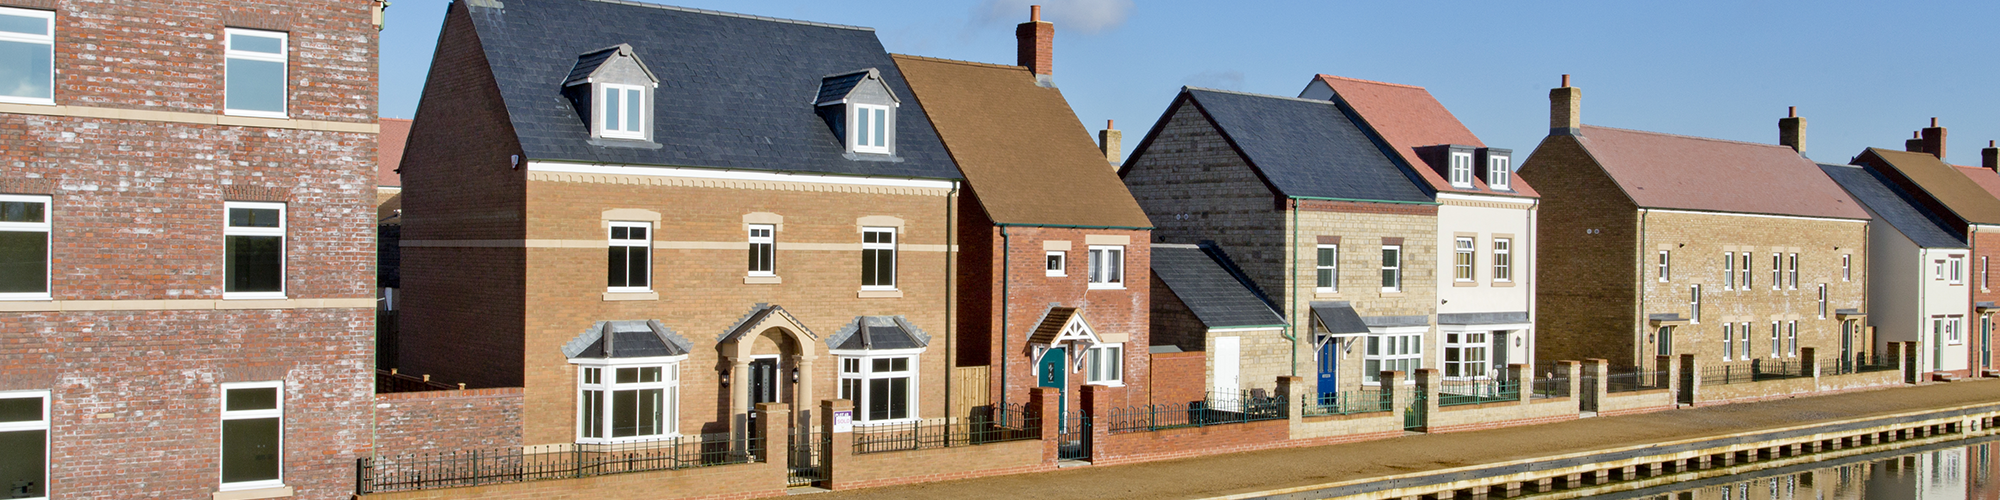 The HOLD Shared Ownership Scheme for Disabled people explained, by SAM Conveyancing